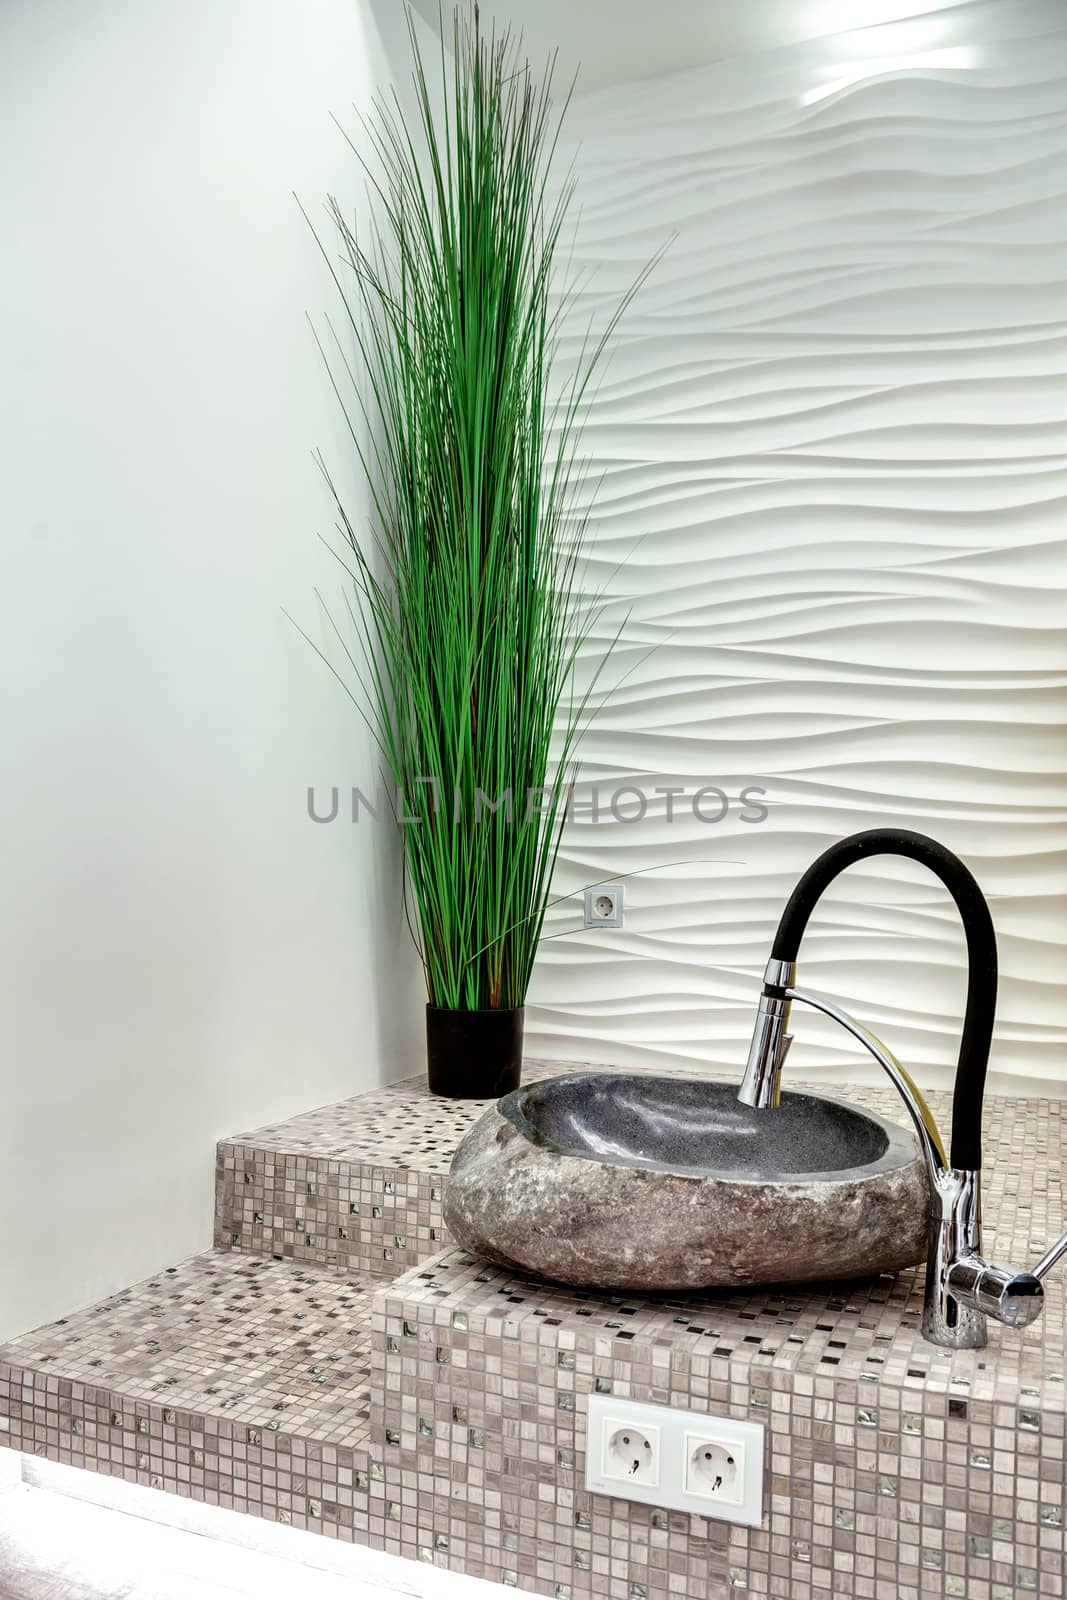 stone sink for pedicure on the floor